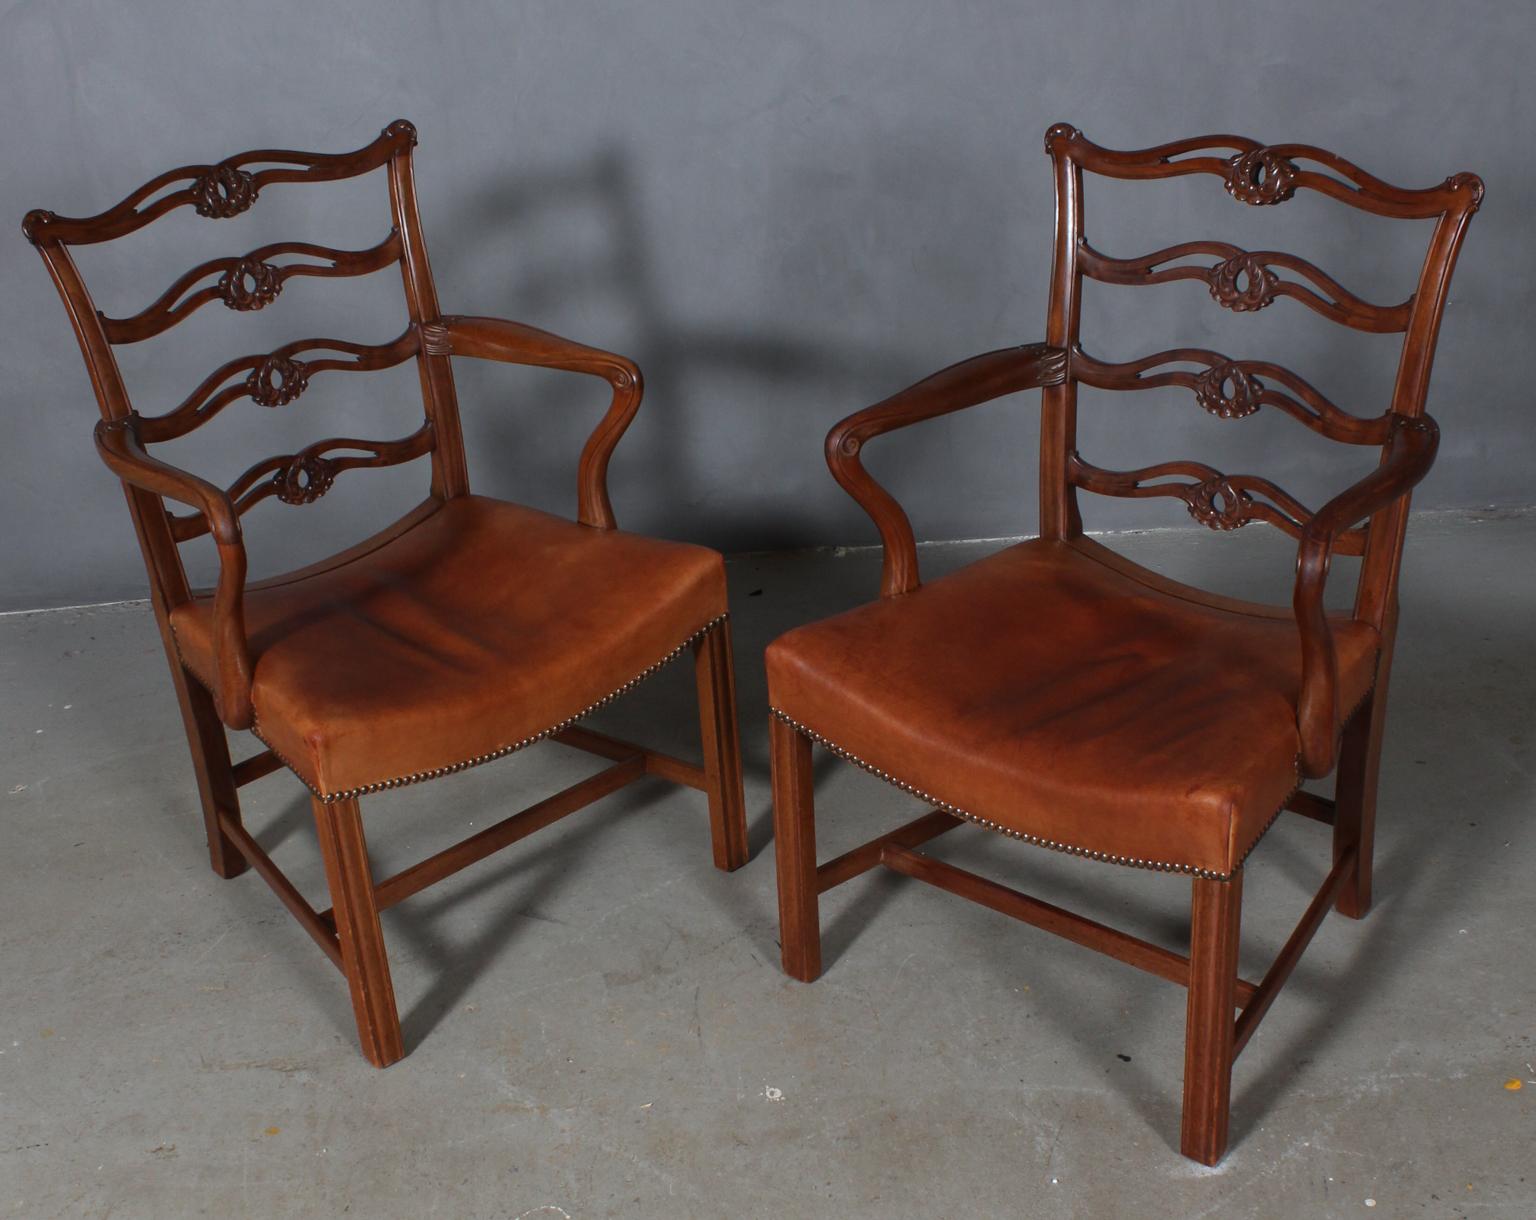 Pair of Chippendale style armchairs with rich details. Made in mahogany.

Original upholstered with patinated leather. 

Made in Denmark, circa 1900.